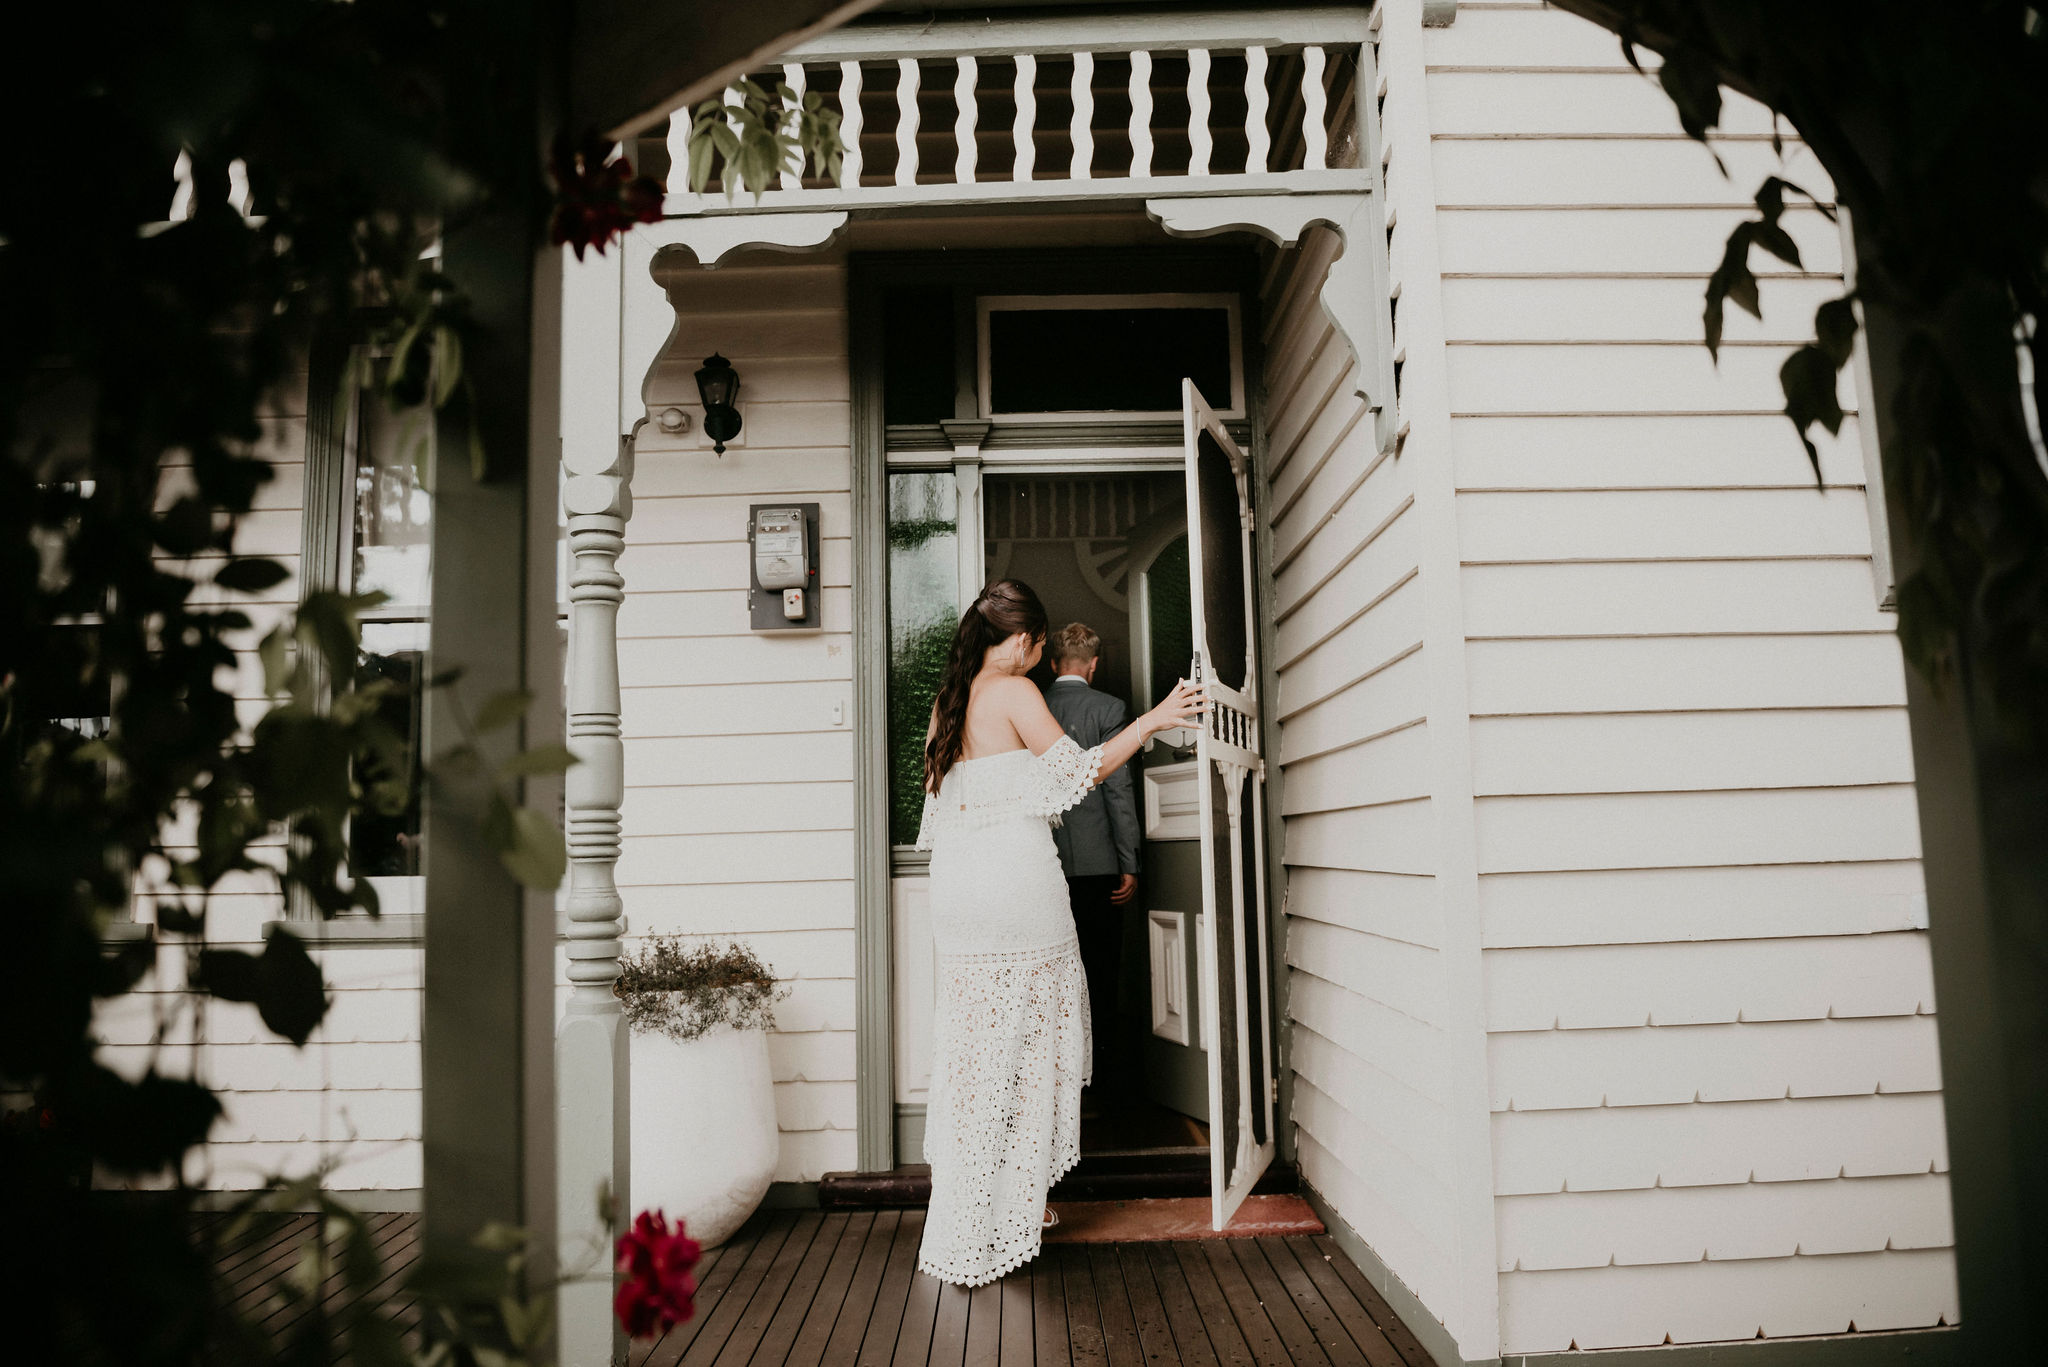 Lets-Elope-Melbourne-Celebrant-Photographer-Elopement-Package-Victoria-Sarah-Matler-Photography-Elope-at-Home-Footscray-weddings-intimate-23